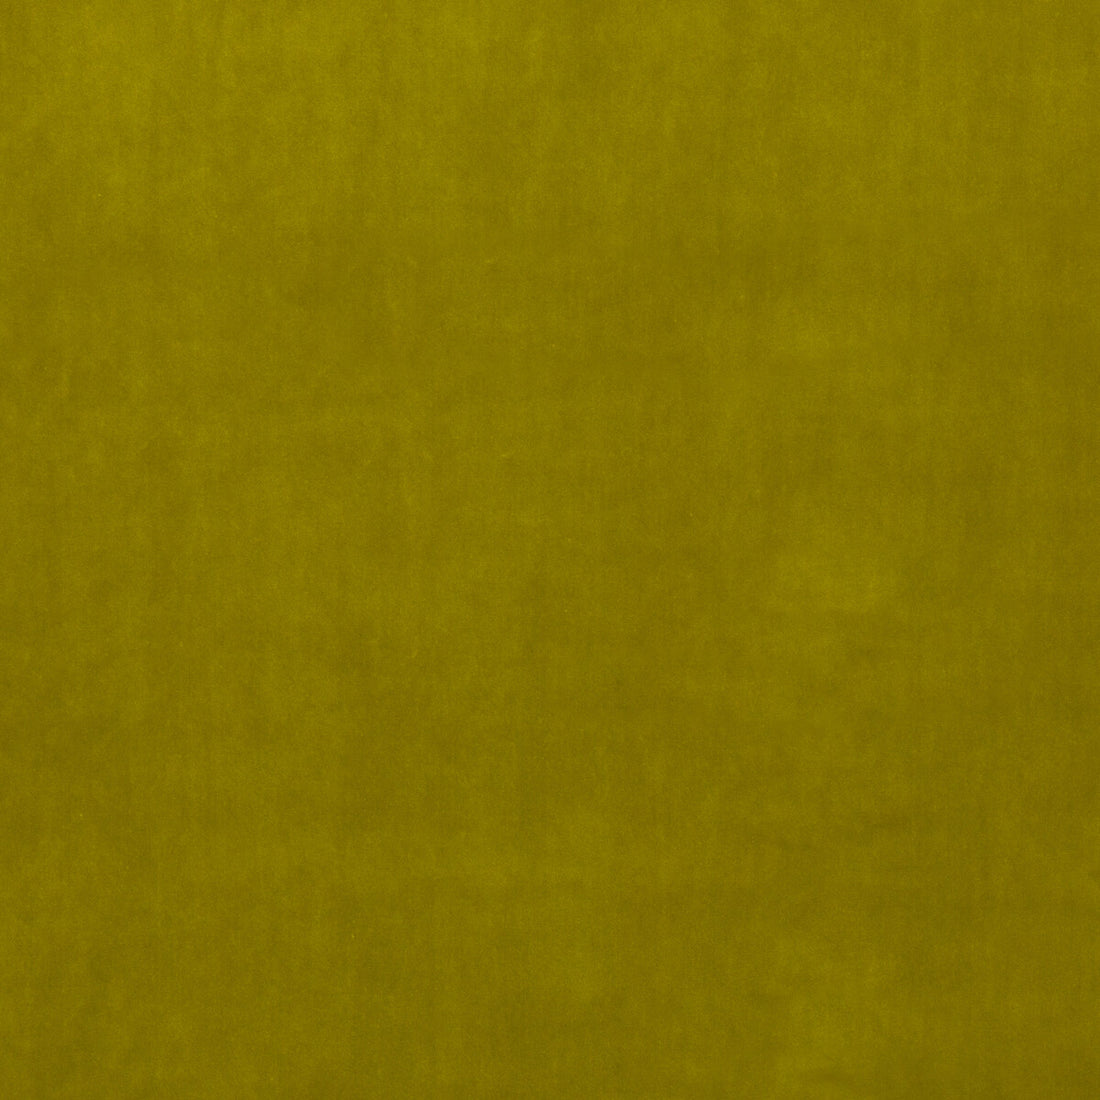 Lyla Velvet fabric in lime color - pattern 35825.755.0 - by Kravet Contract in the Riviera Velvet collection